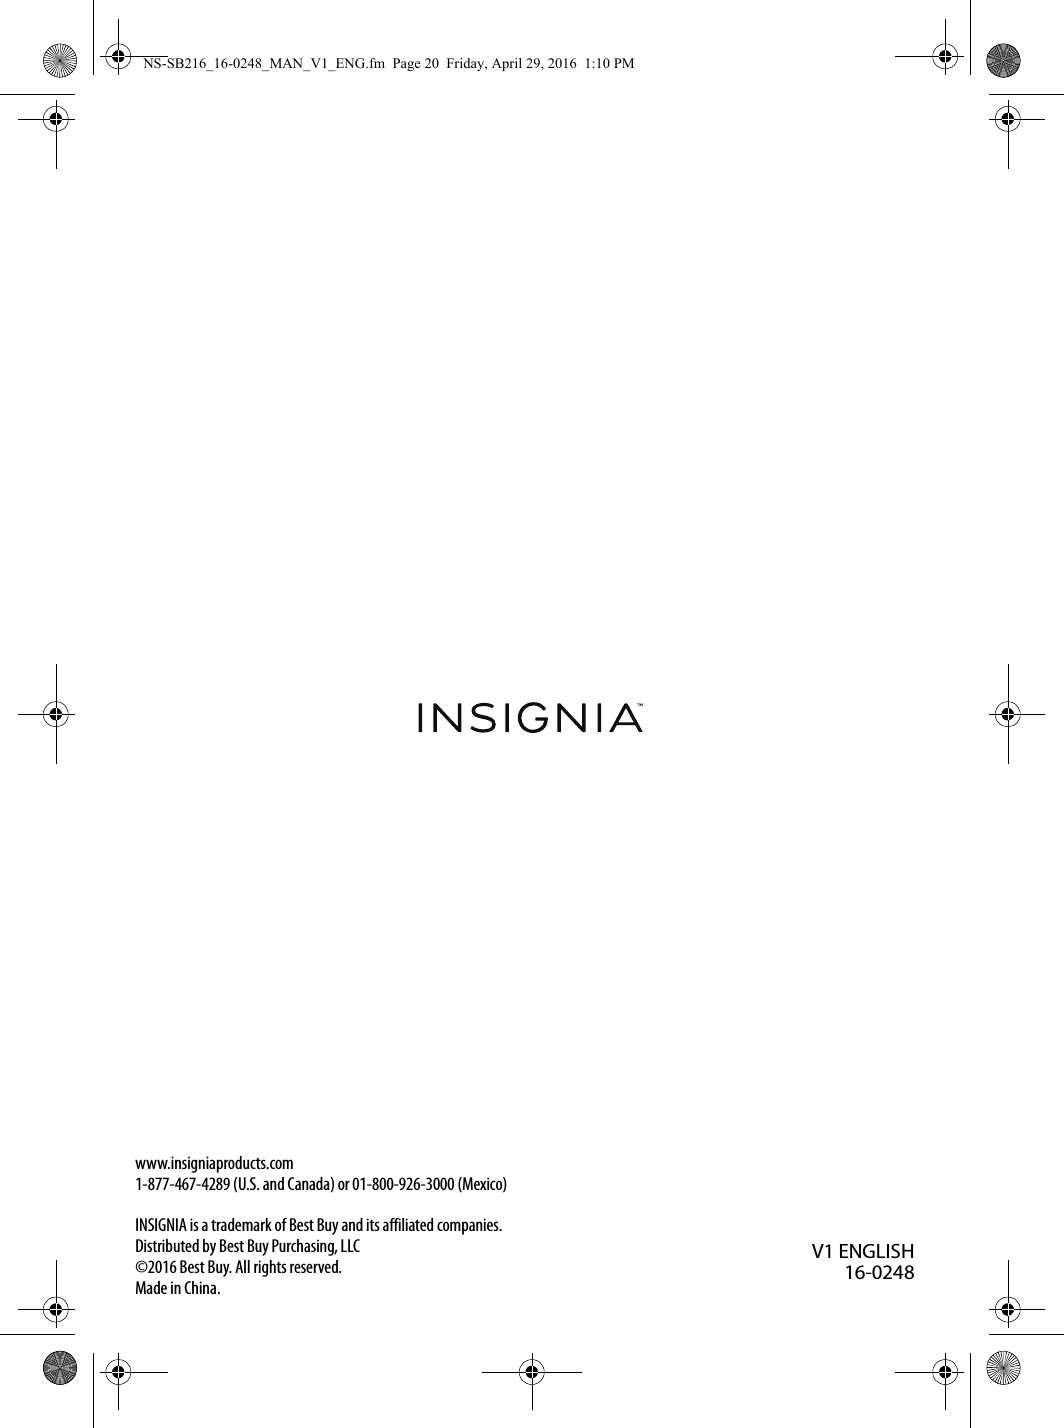 www.insigniaproducts.com1-877-467-4289 (U.S. and Canada) or 01-800-926-3000 (Mexico)INSIGNIA is a trademark of Best Buy and its affiliated companies.Distributed by Best Buy Purchasing, LLC©2016 Best Buy. All rights reserved.Made in China.V1 ENGLISH16-0248NS-SB216_16-0248_MAN_V1_ENG.fm  Page 20  Friday, April 29, 2016  1:10 PM